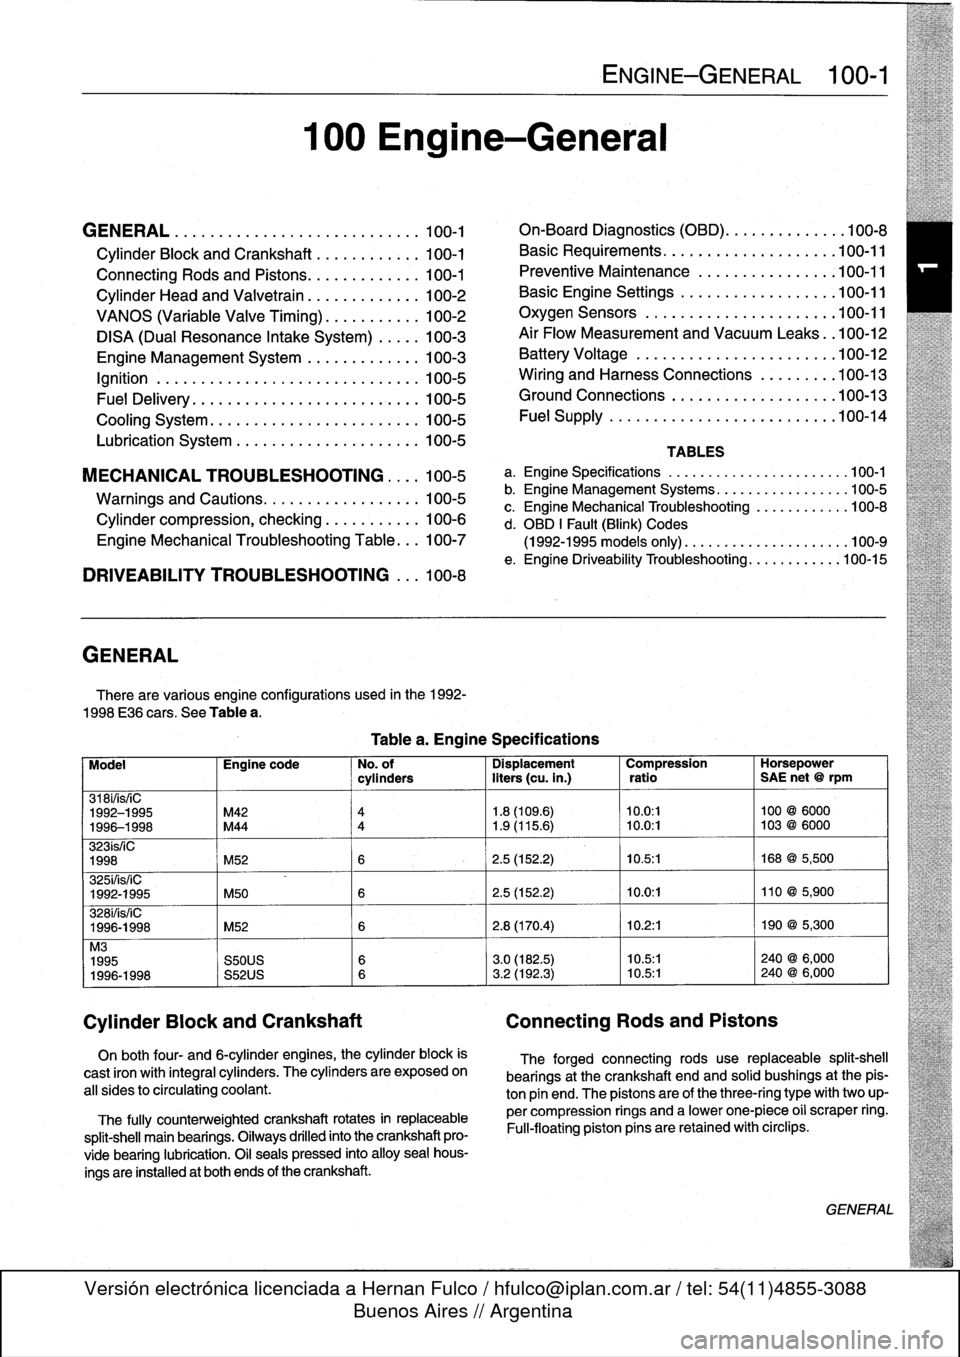 BMW 325i 1993 E36 Workshop Manual 
GENERAL
.
.....
.
.
.
.
.
.
.
...
.
.
.
.
.
.
.
.
.
...
100-1

Cylinder
Block
and
Crankshaft
.
.
.
.
.
.
.
.
.
...
100-1

Connecting
Rods
and
Pistons
.
.
.
.
.
.
.
.
.
.
.
.
.
100-1

Cylinder
Head
an